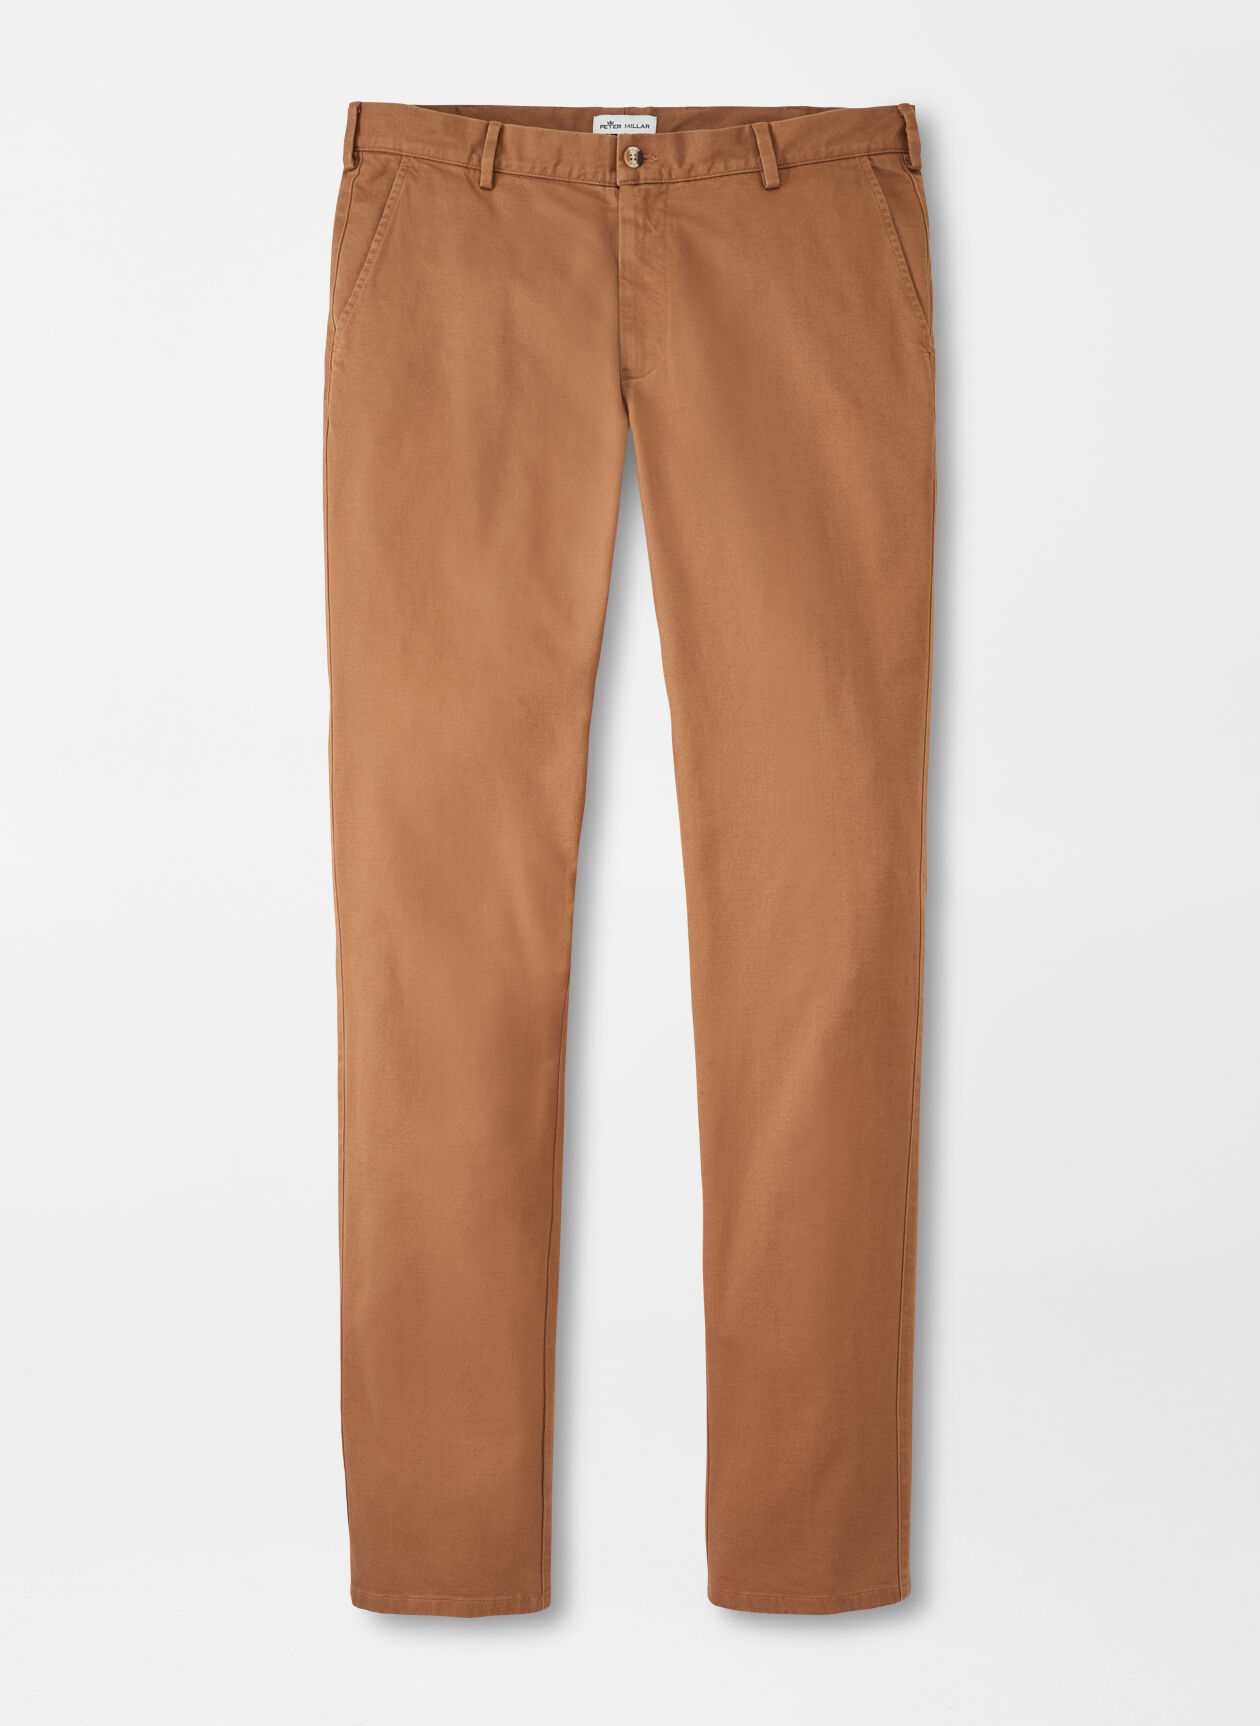 Pilot Twill Flat Front Trouser in British Tan Size 30x29 with